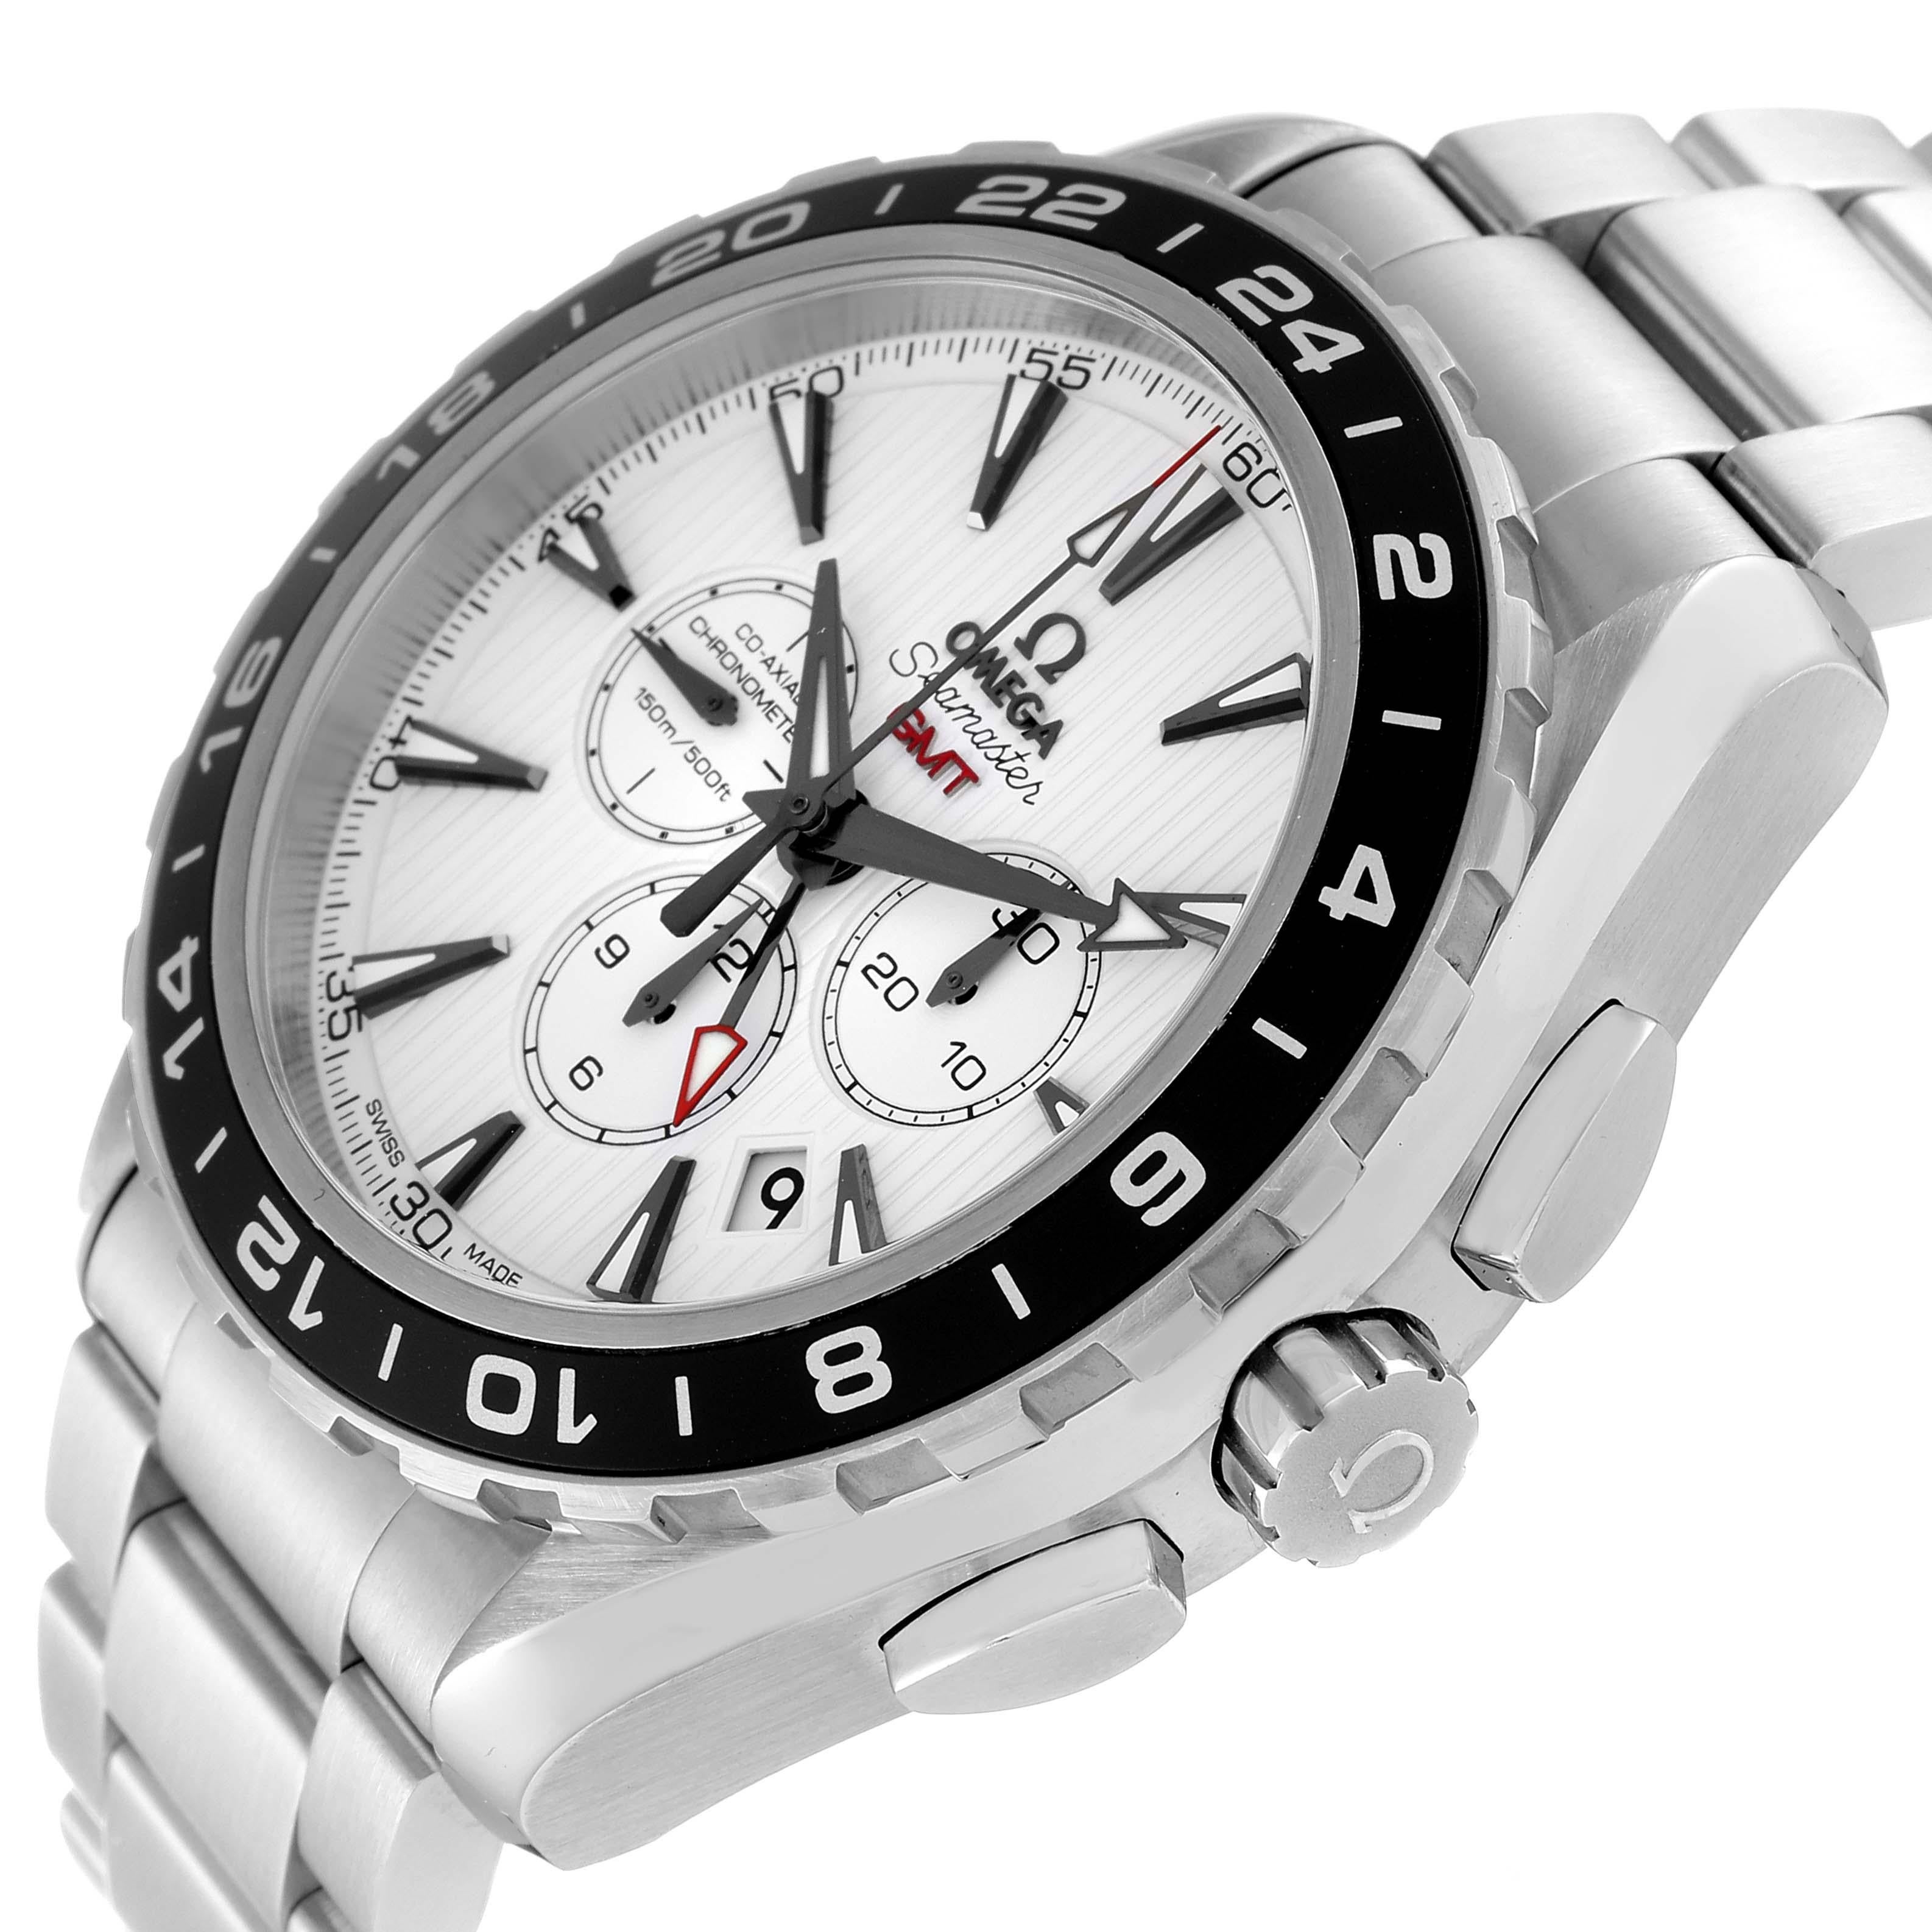 Omega Seamaster GMT Chronograph Steel Mens Watch 231.10.44.52.04.001 Card 1